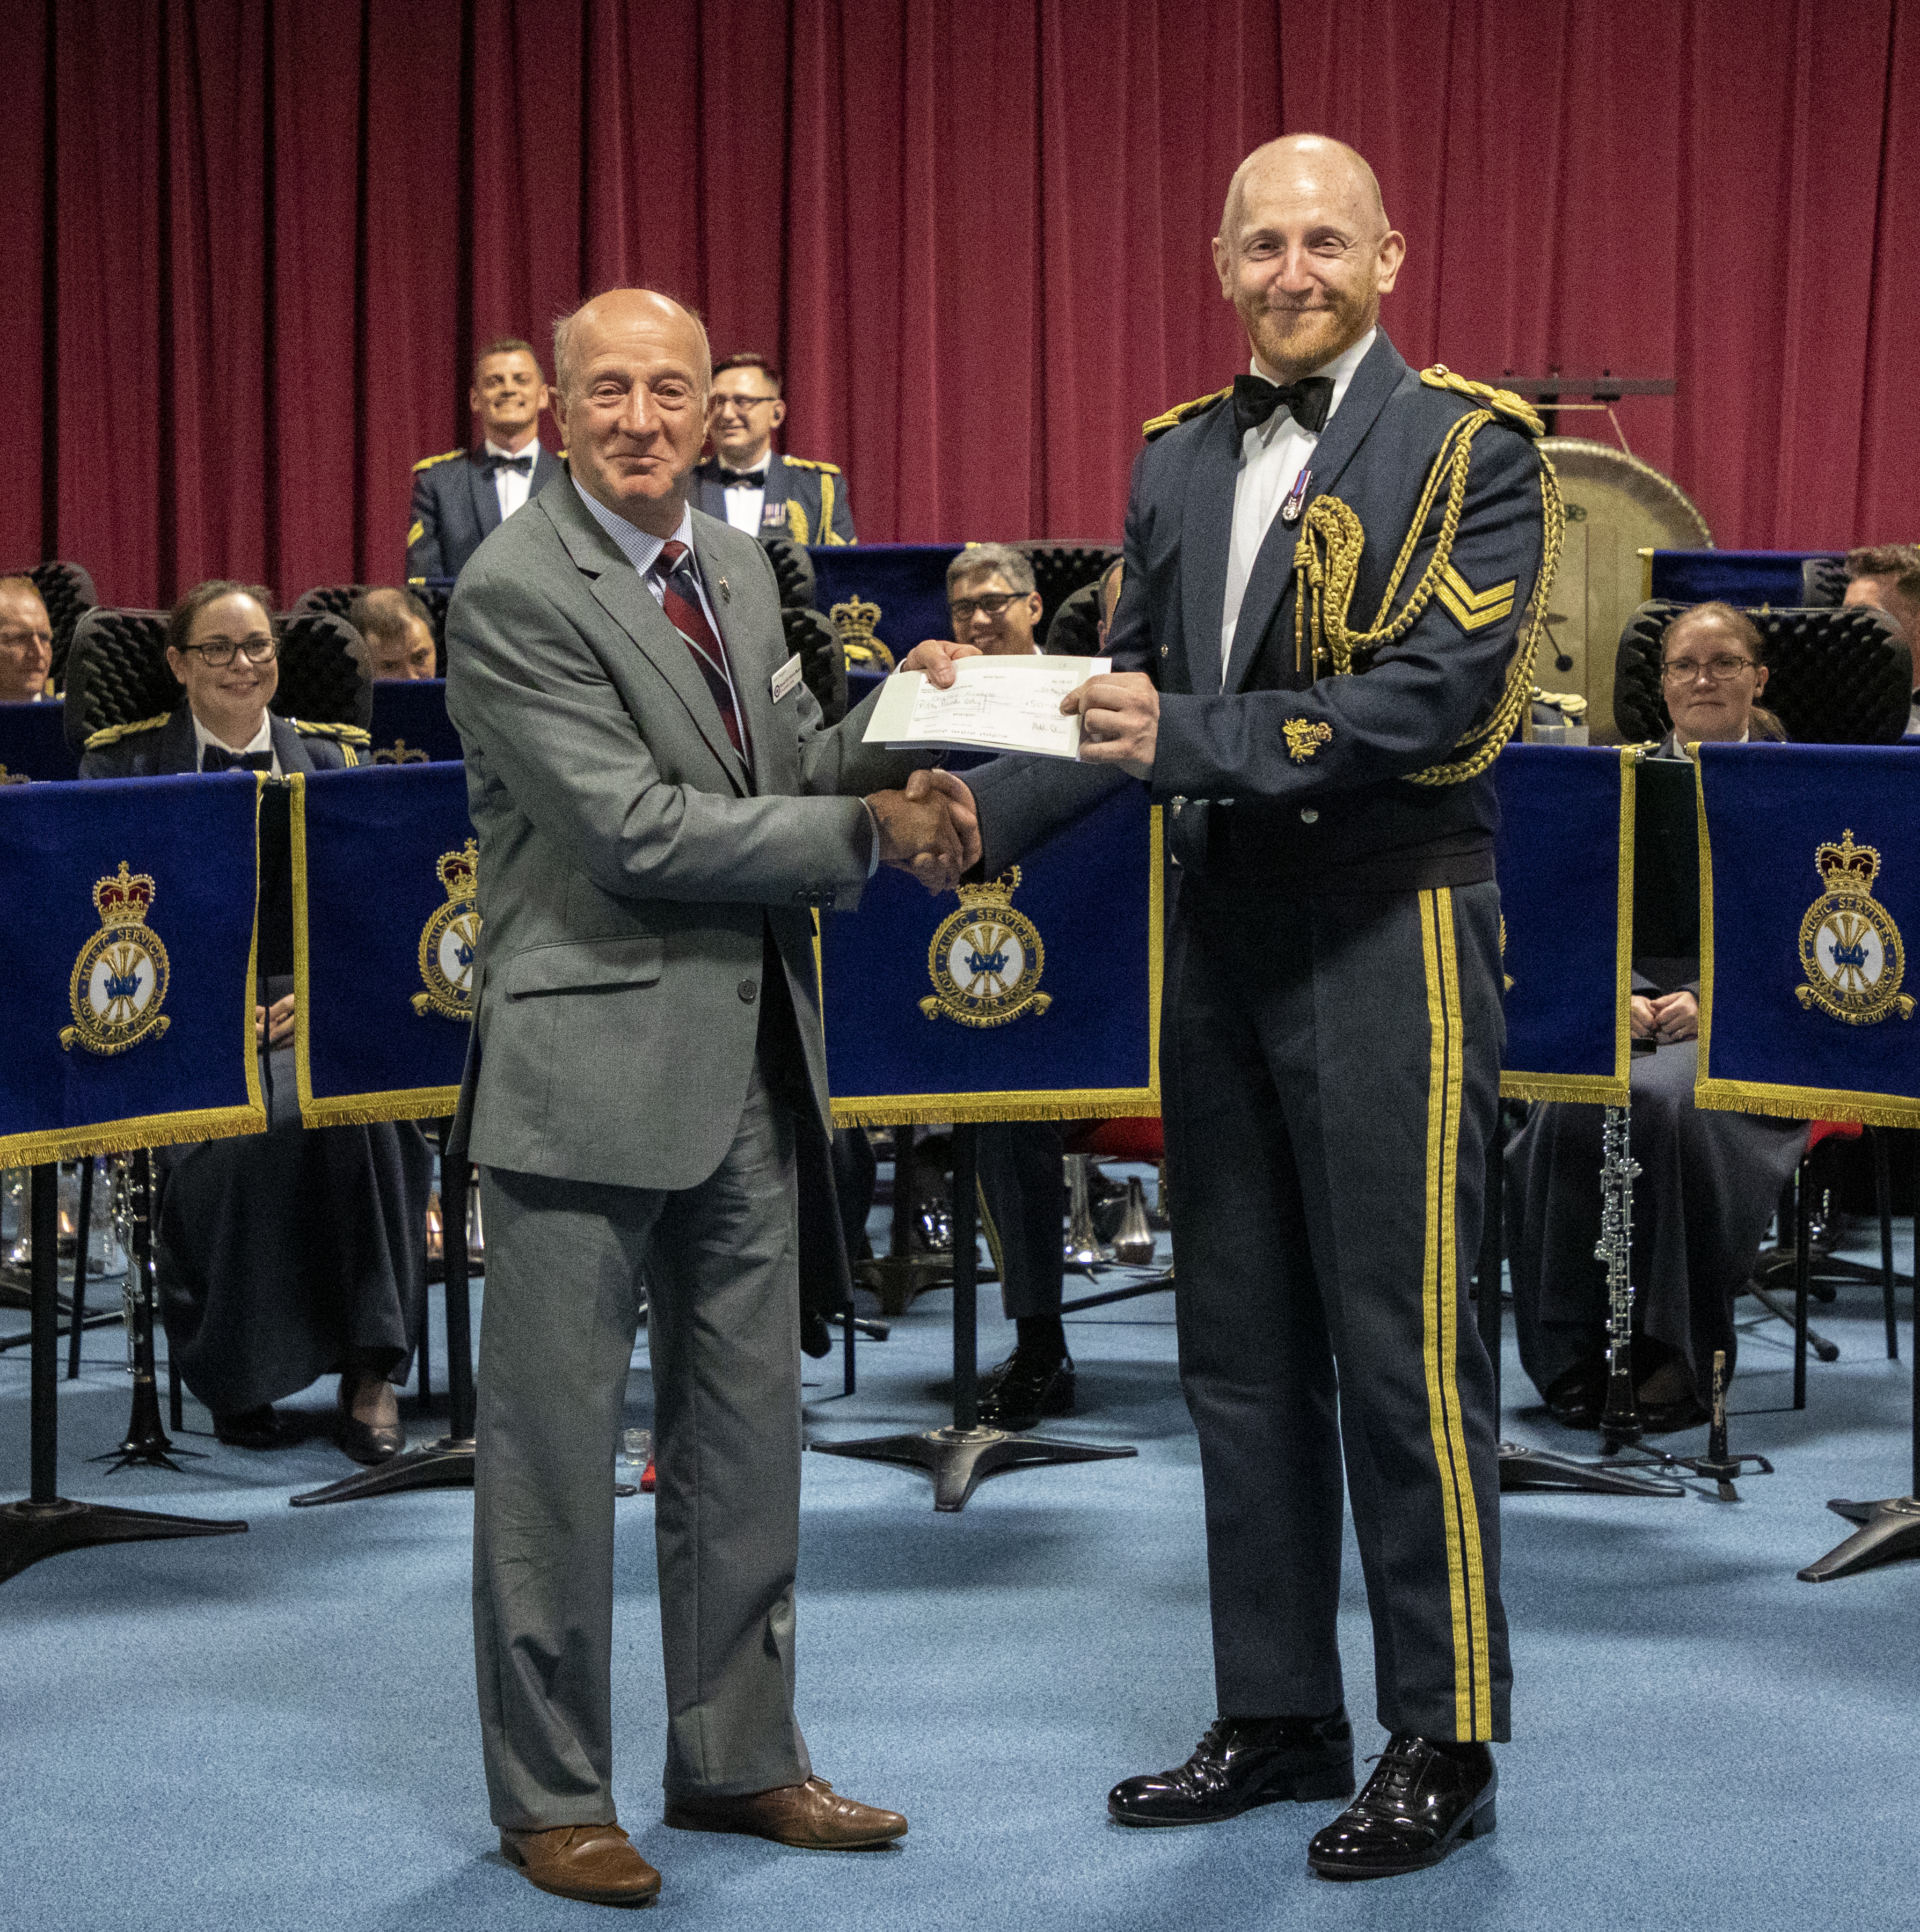 RAF Musician is presented with certificate awards by Adjudicator, and Band in the background.